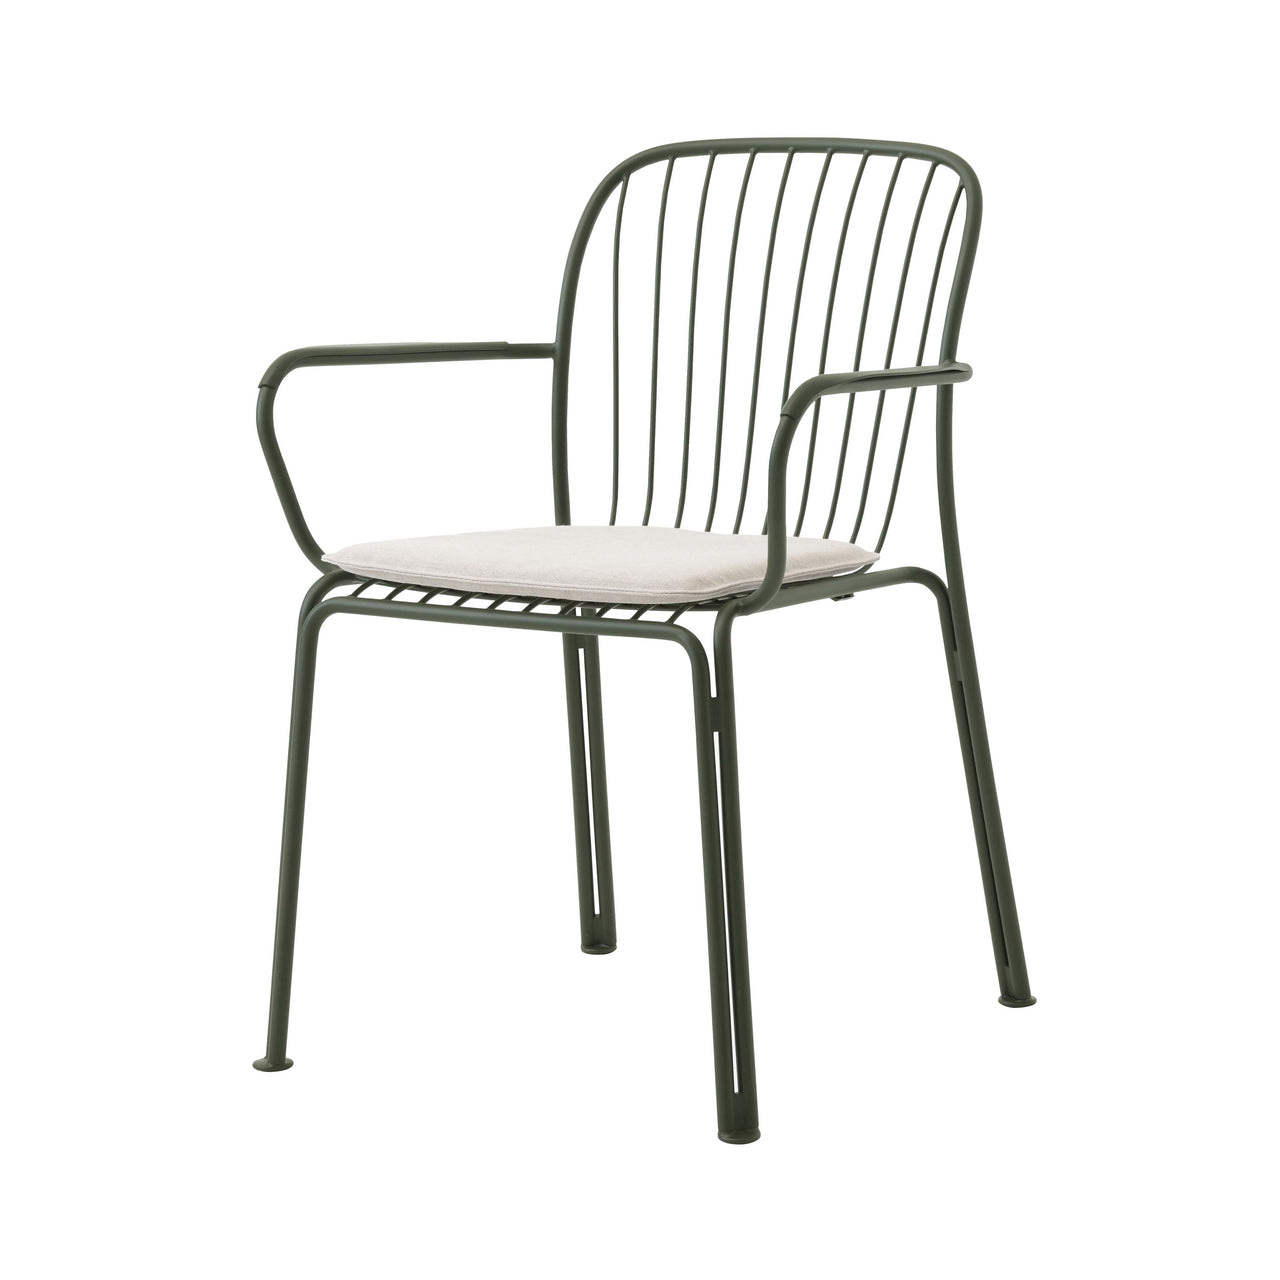 Thorvald SC95 Armchair with Seatpad: Outdoor+ Bronze Green + Heritage Papyrus 